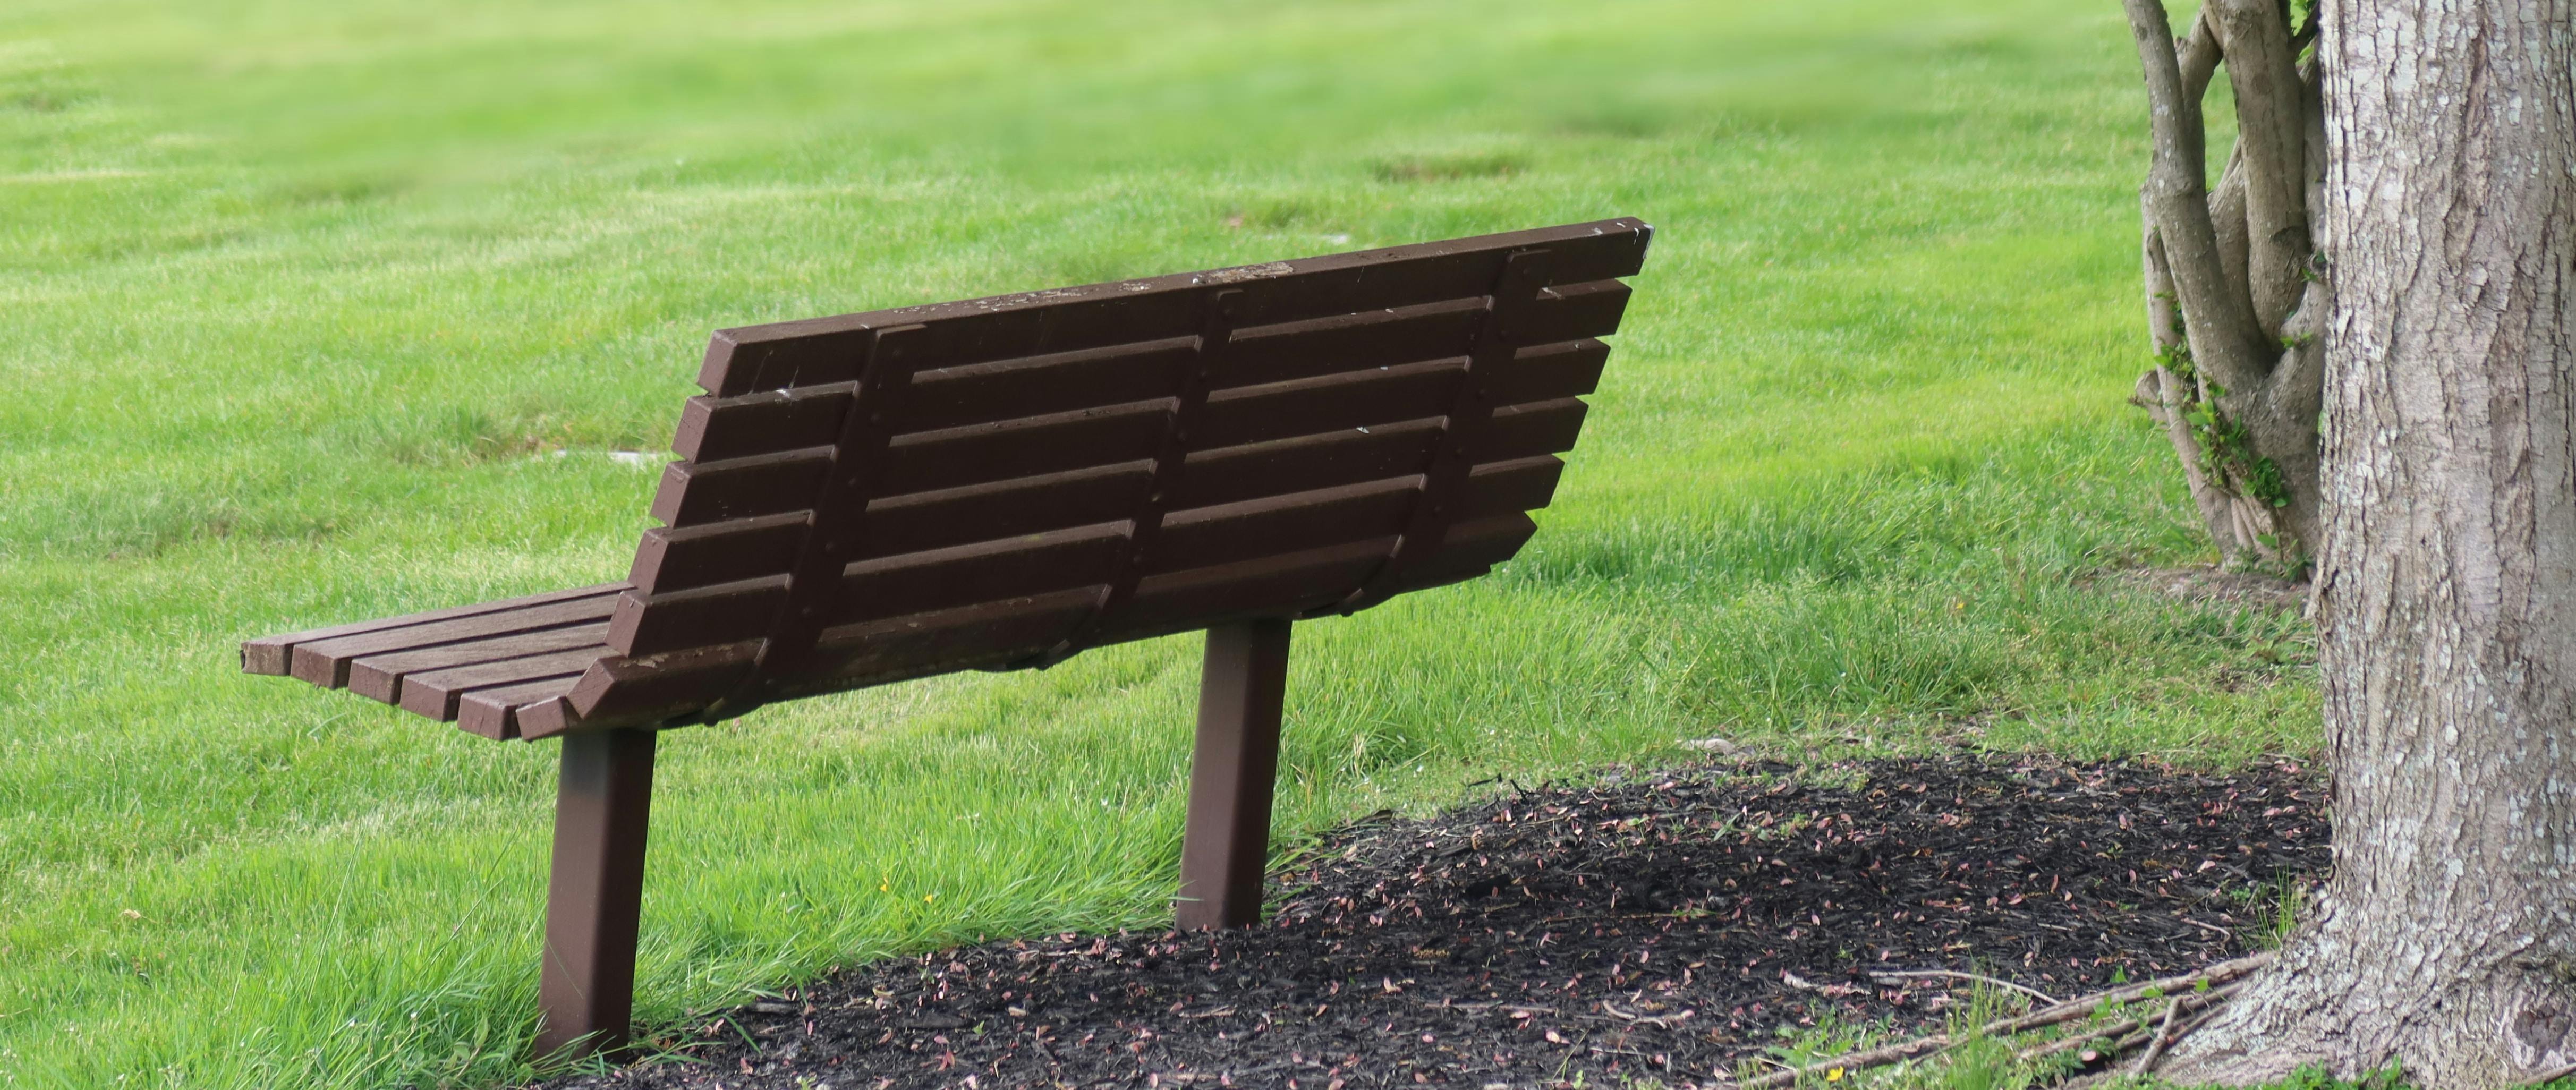 A bench in a park next to a tree.